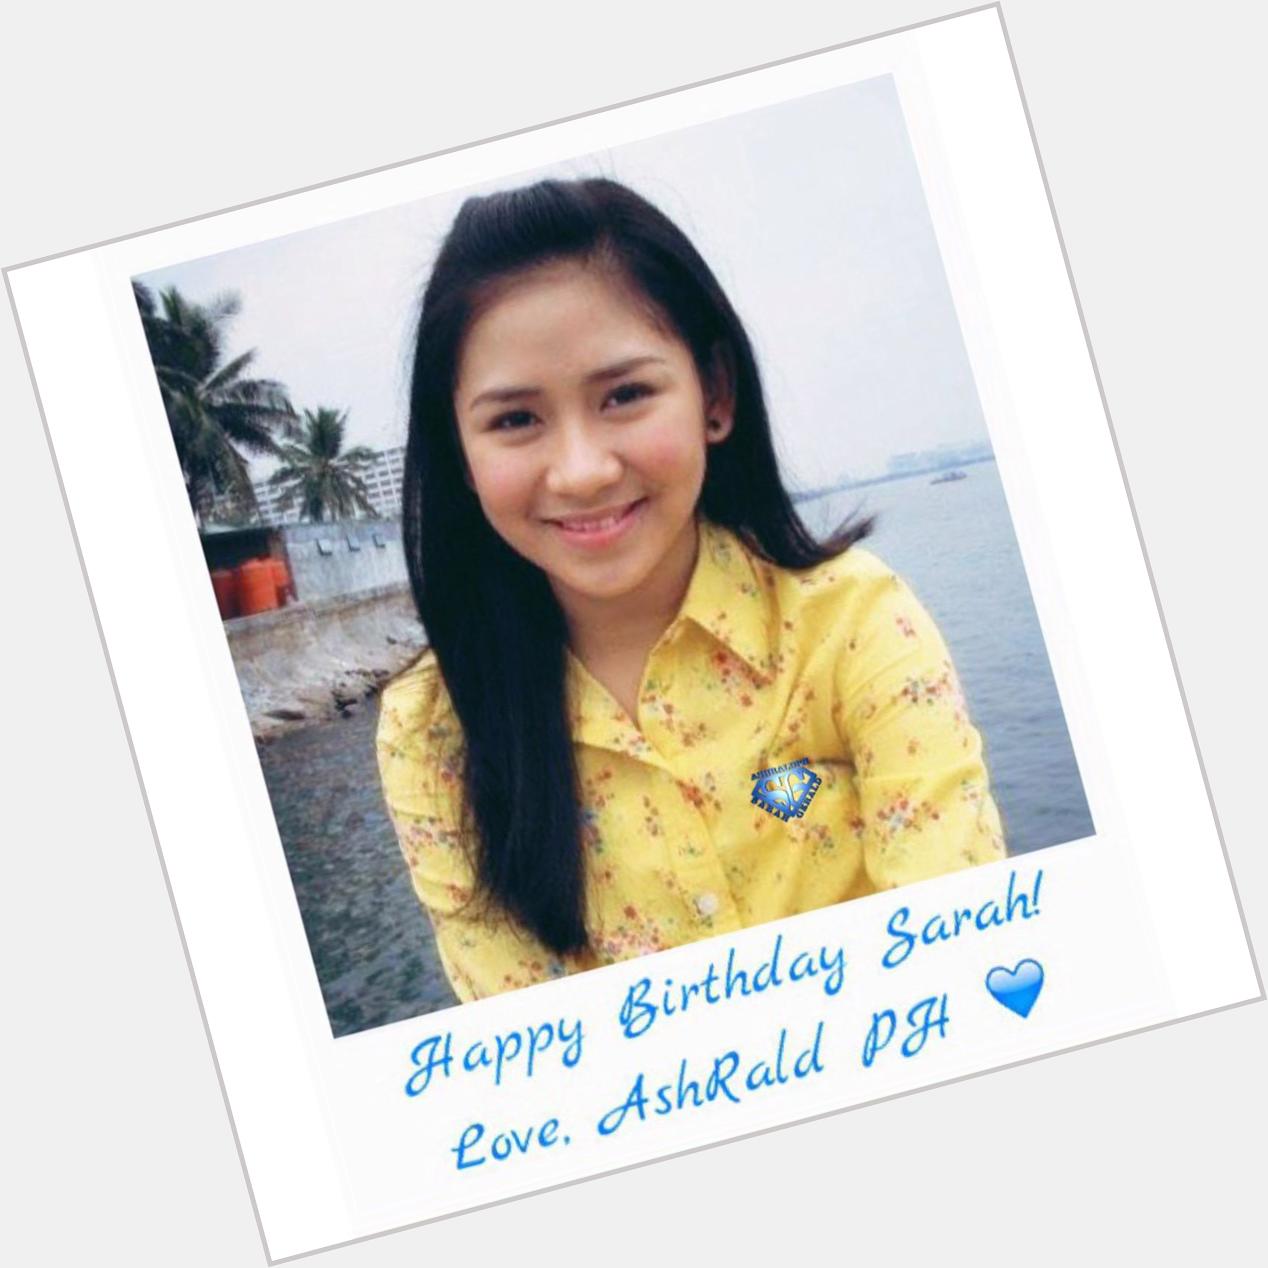 Our Baby girl just turned 27! God Bless you we love you! 

Happy Birthday Sarah Geronimo 